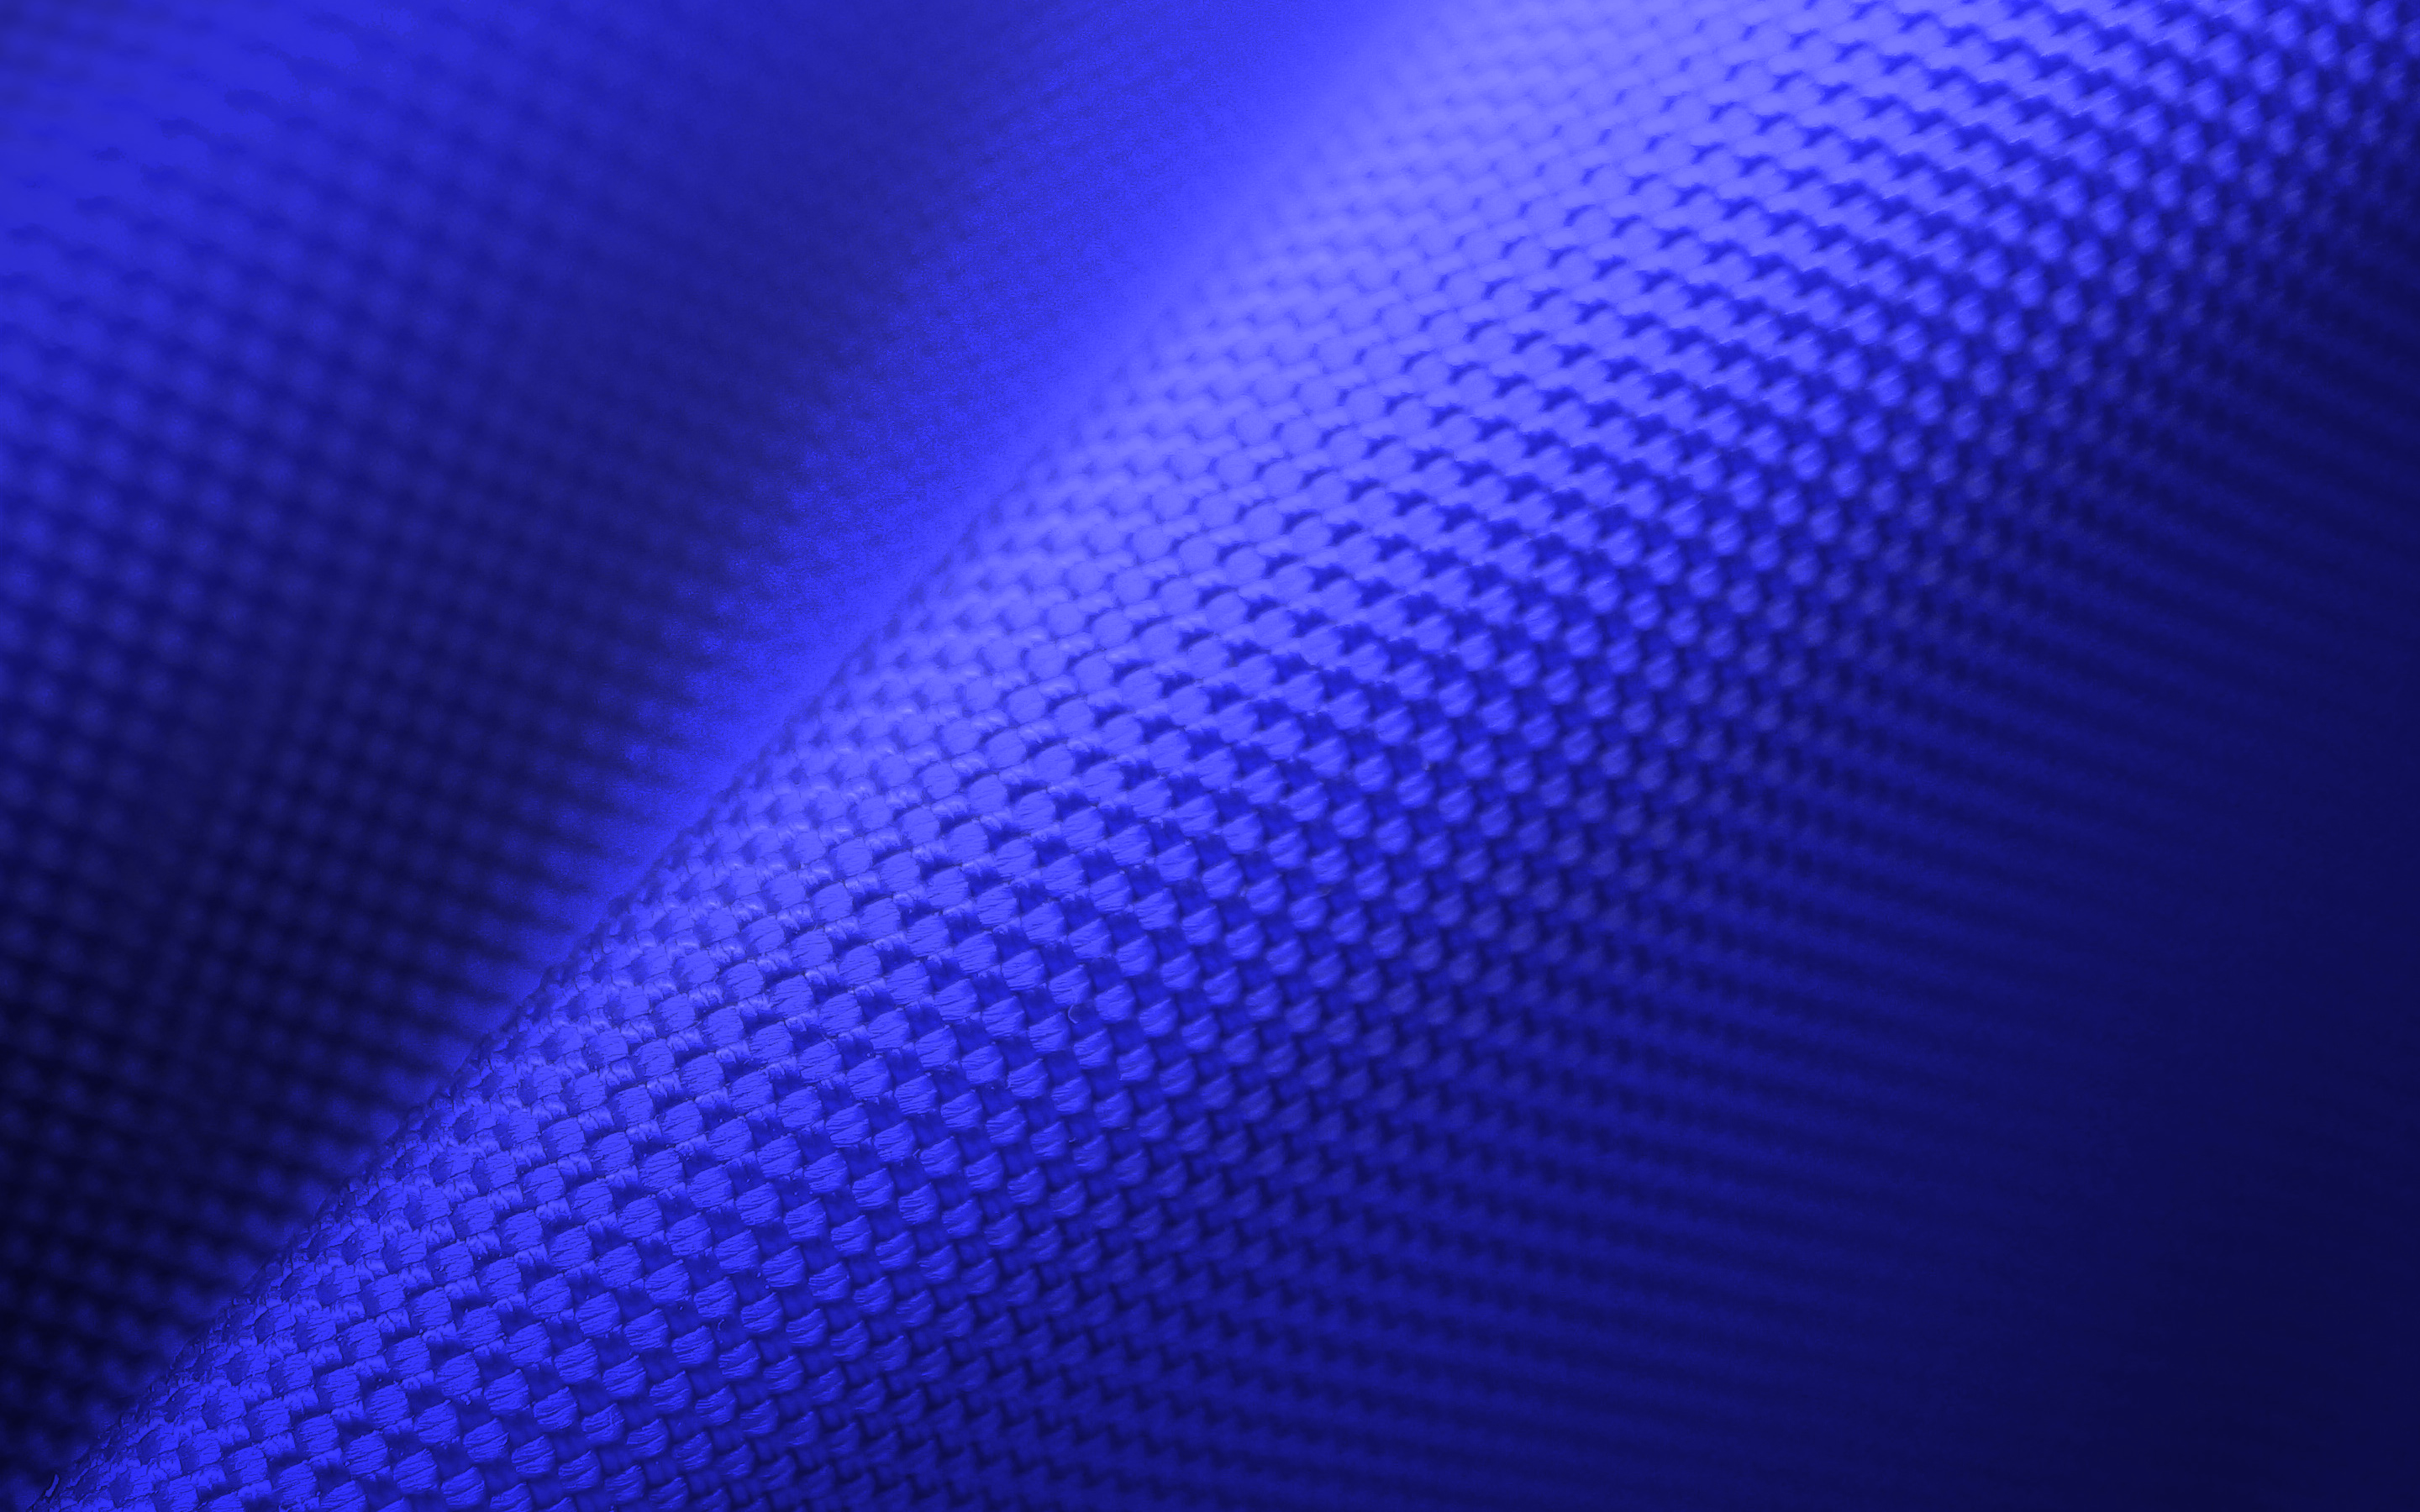 General 2880x1800 fabric blue abstract